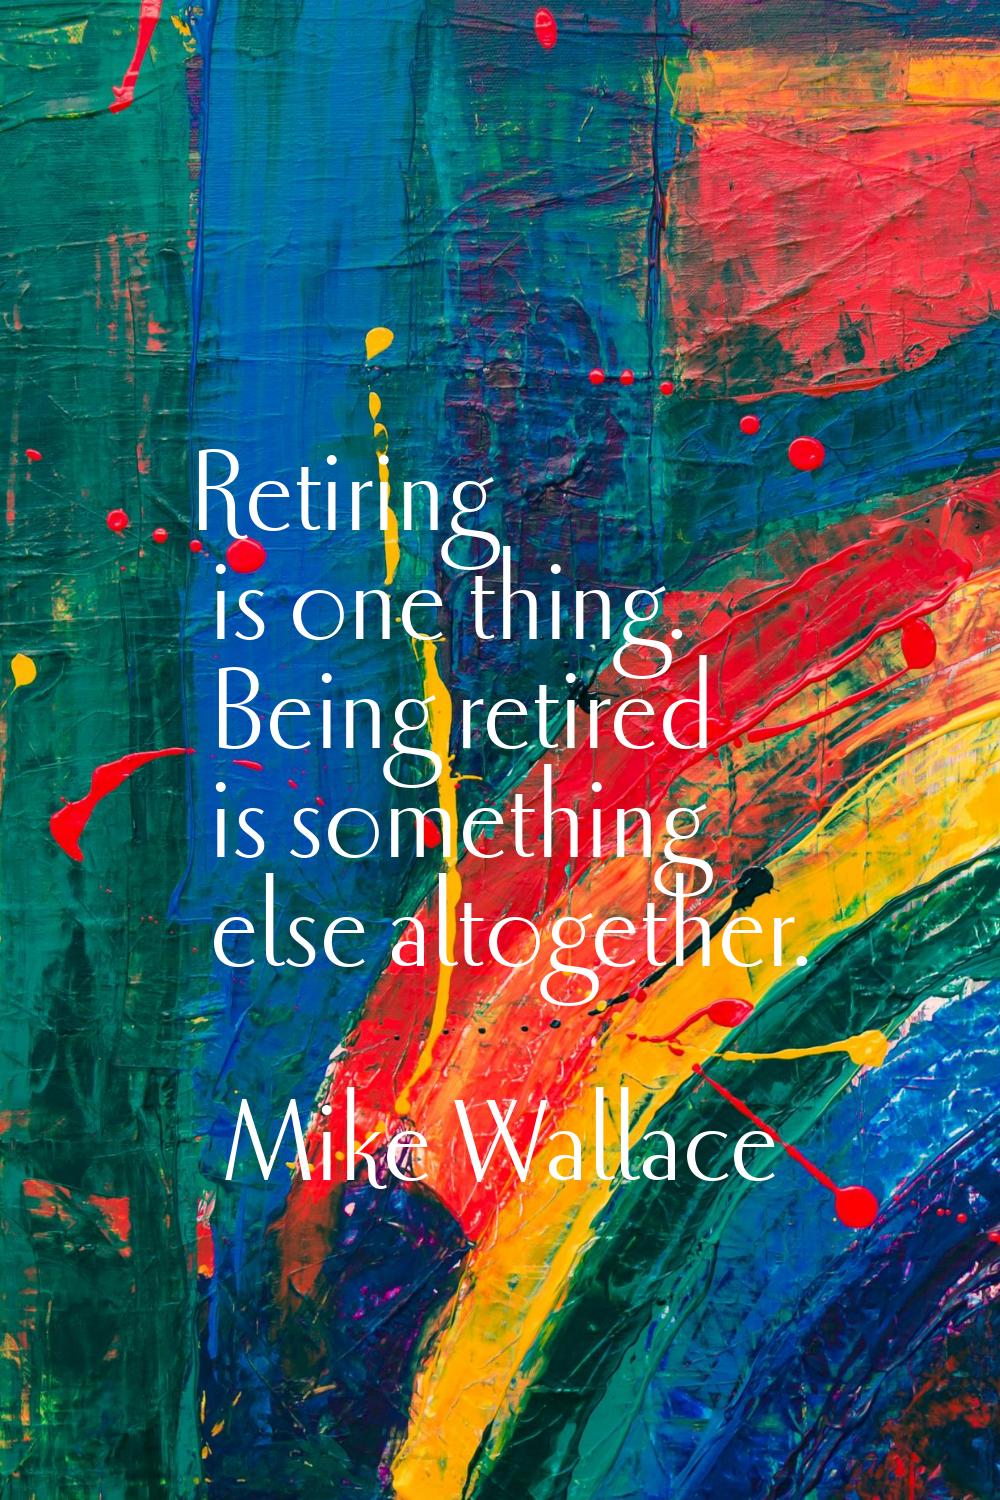 Retiring is one thing. Being retired is something else altogether.